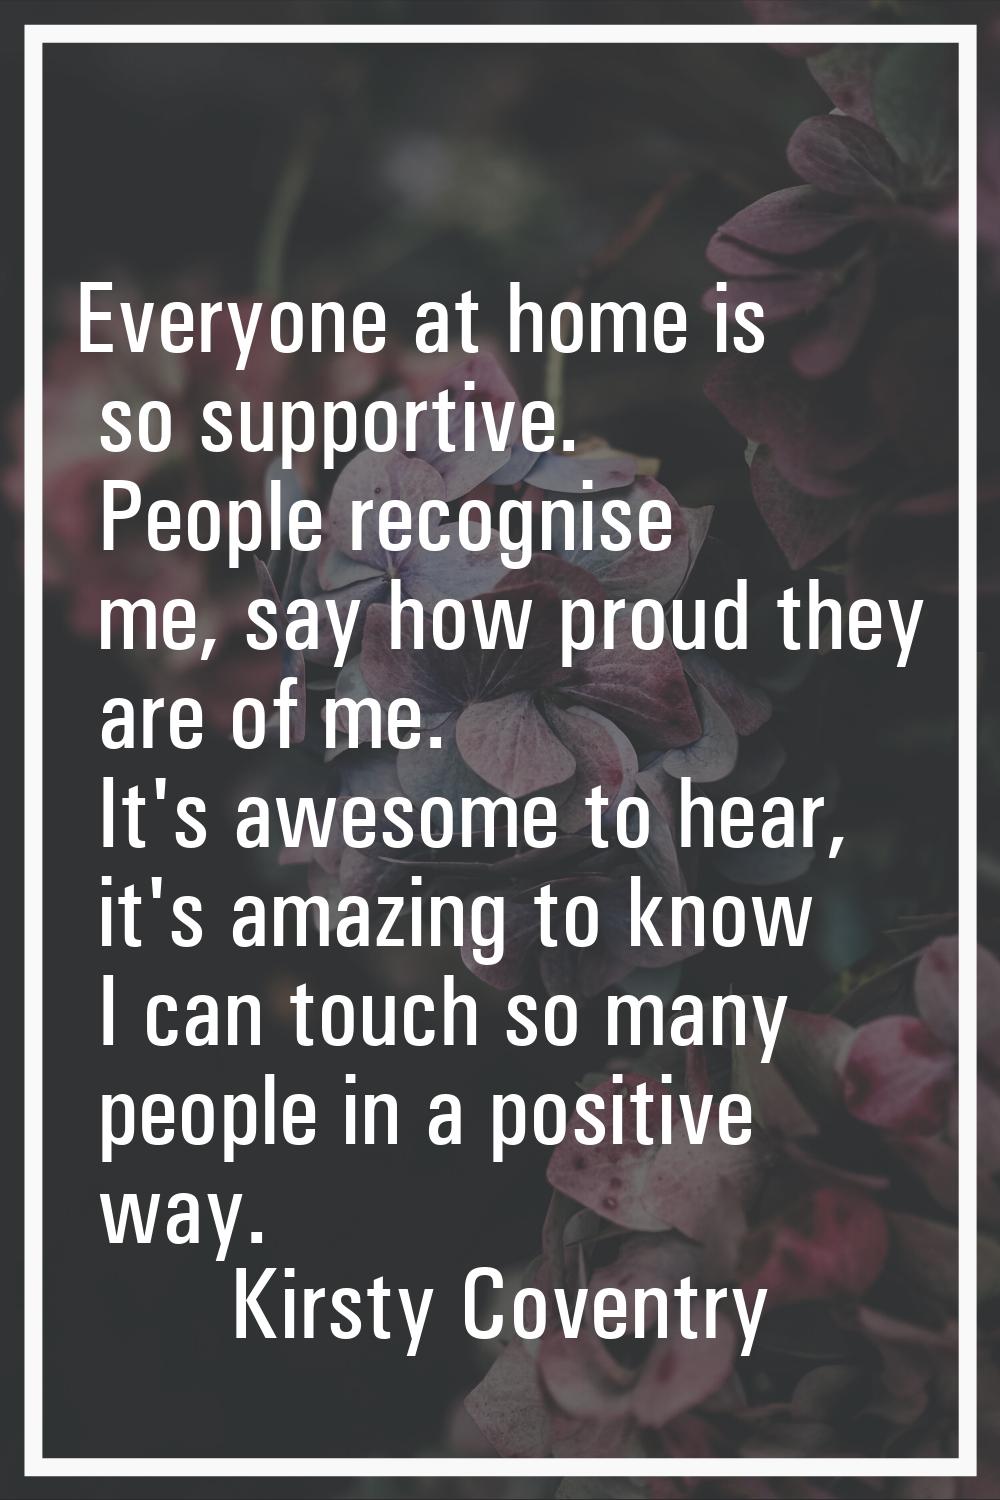 Everyone at home is so supportive. People recognise me, say how proud they are of me. It's awesome 